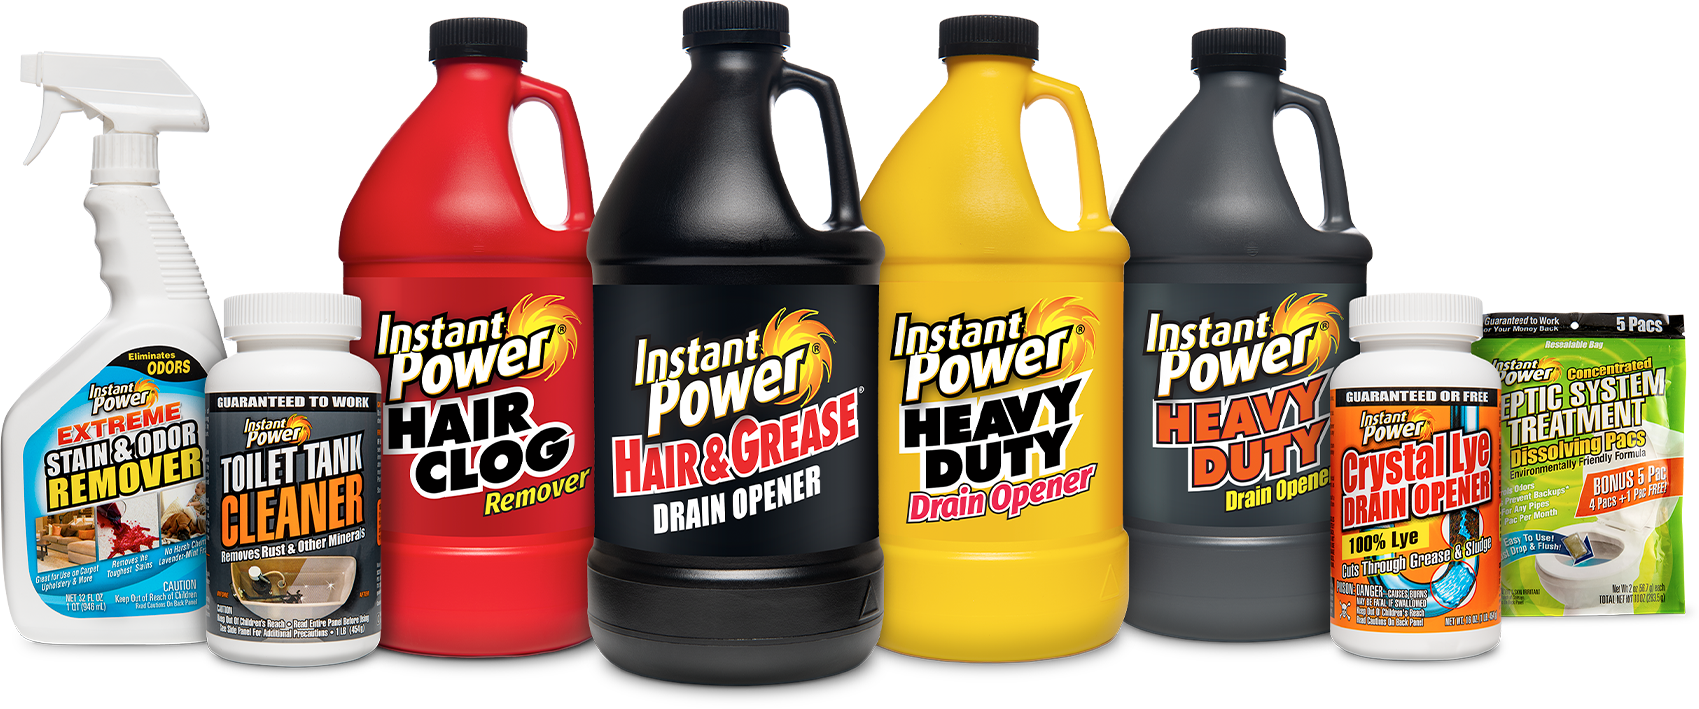 Instant Power Drain Cleaner - Product Review 